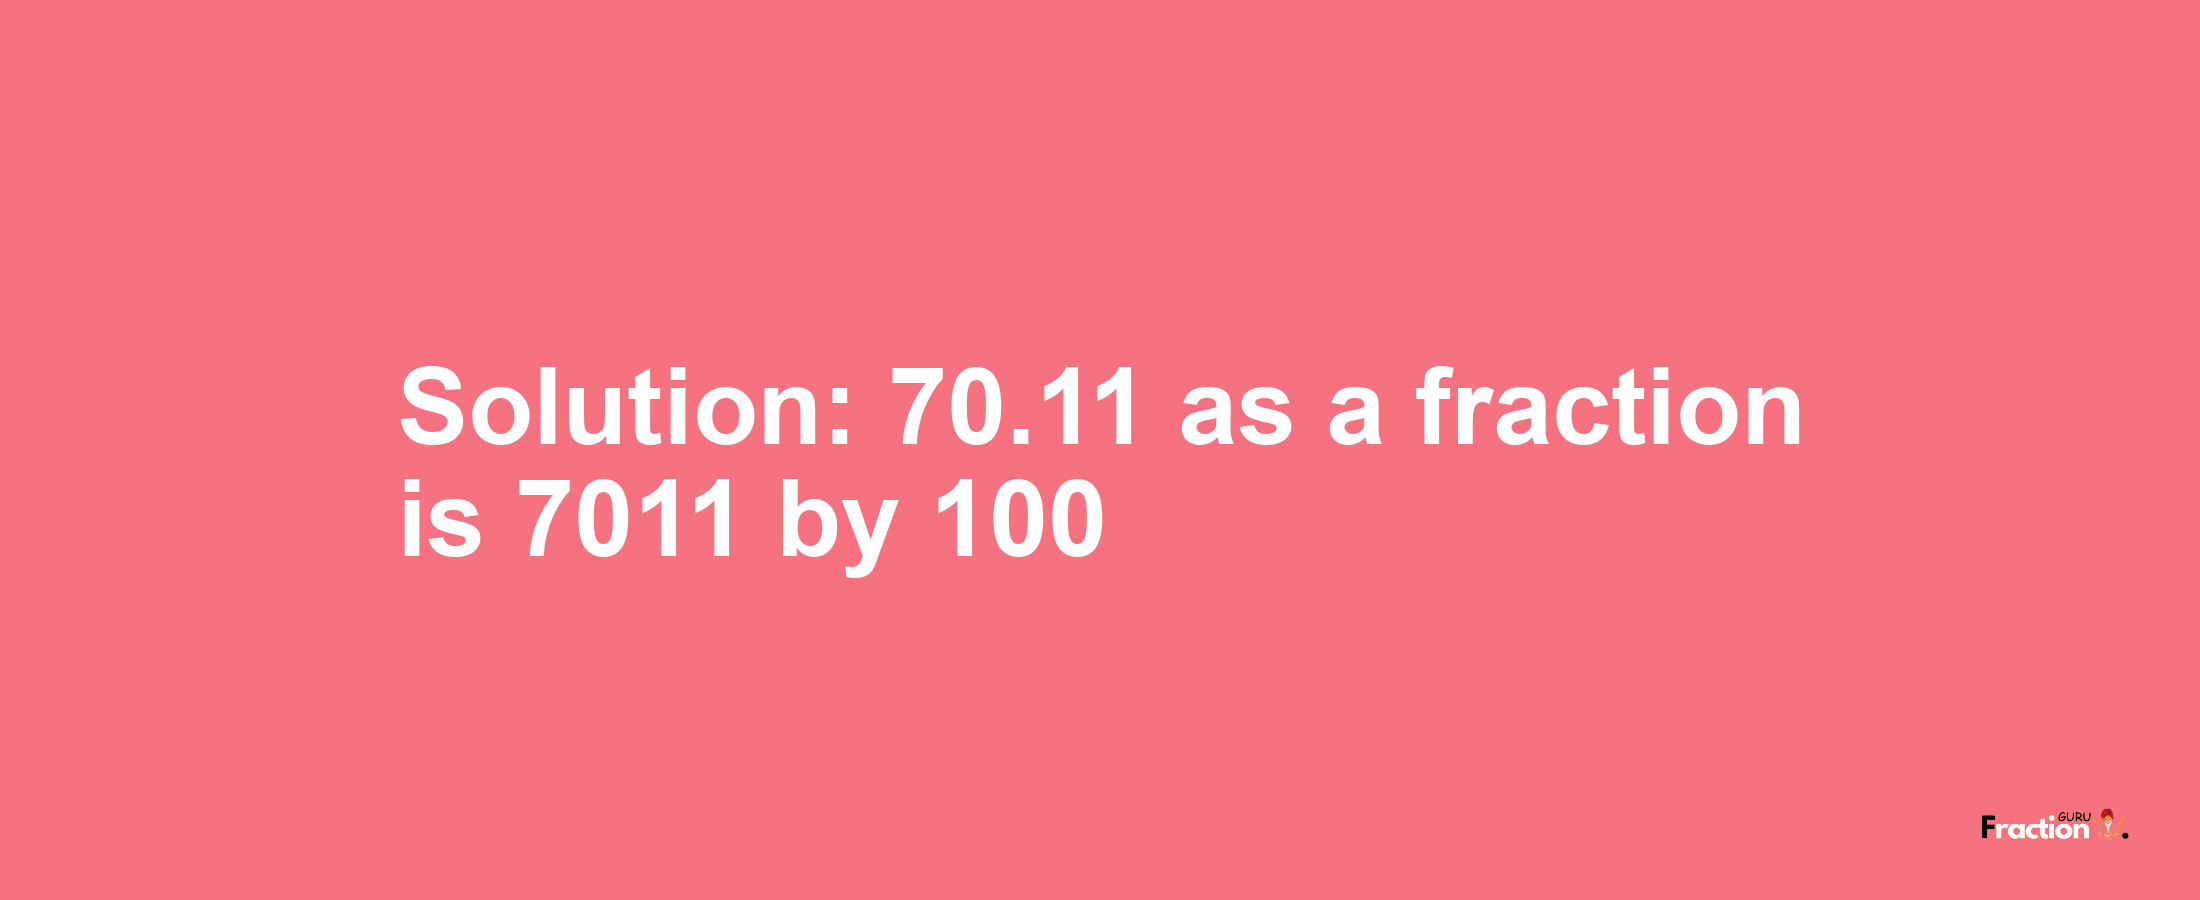 Solution:70.11 as a fraction is 7011/100